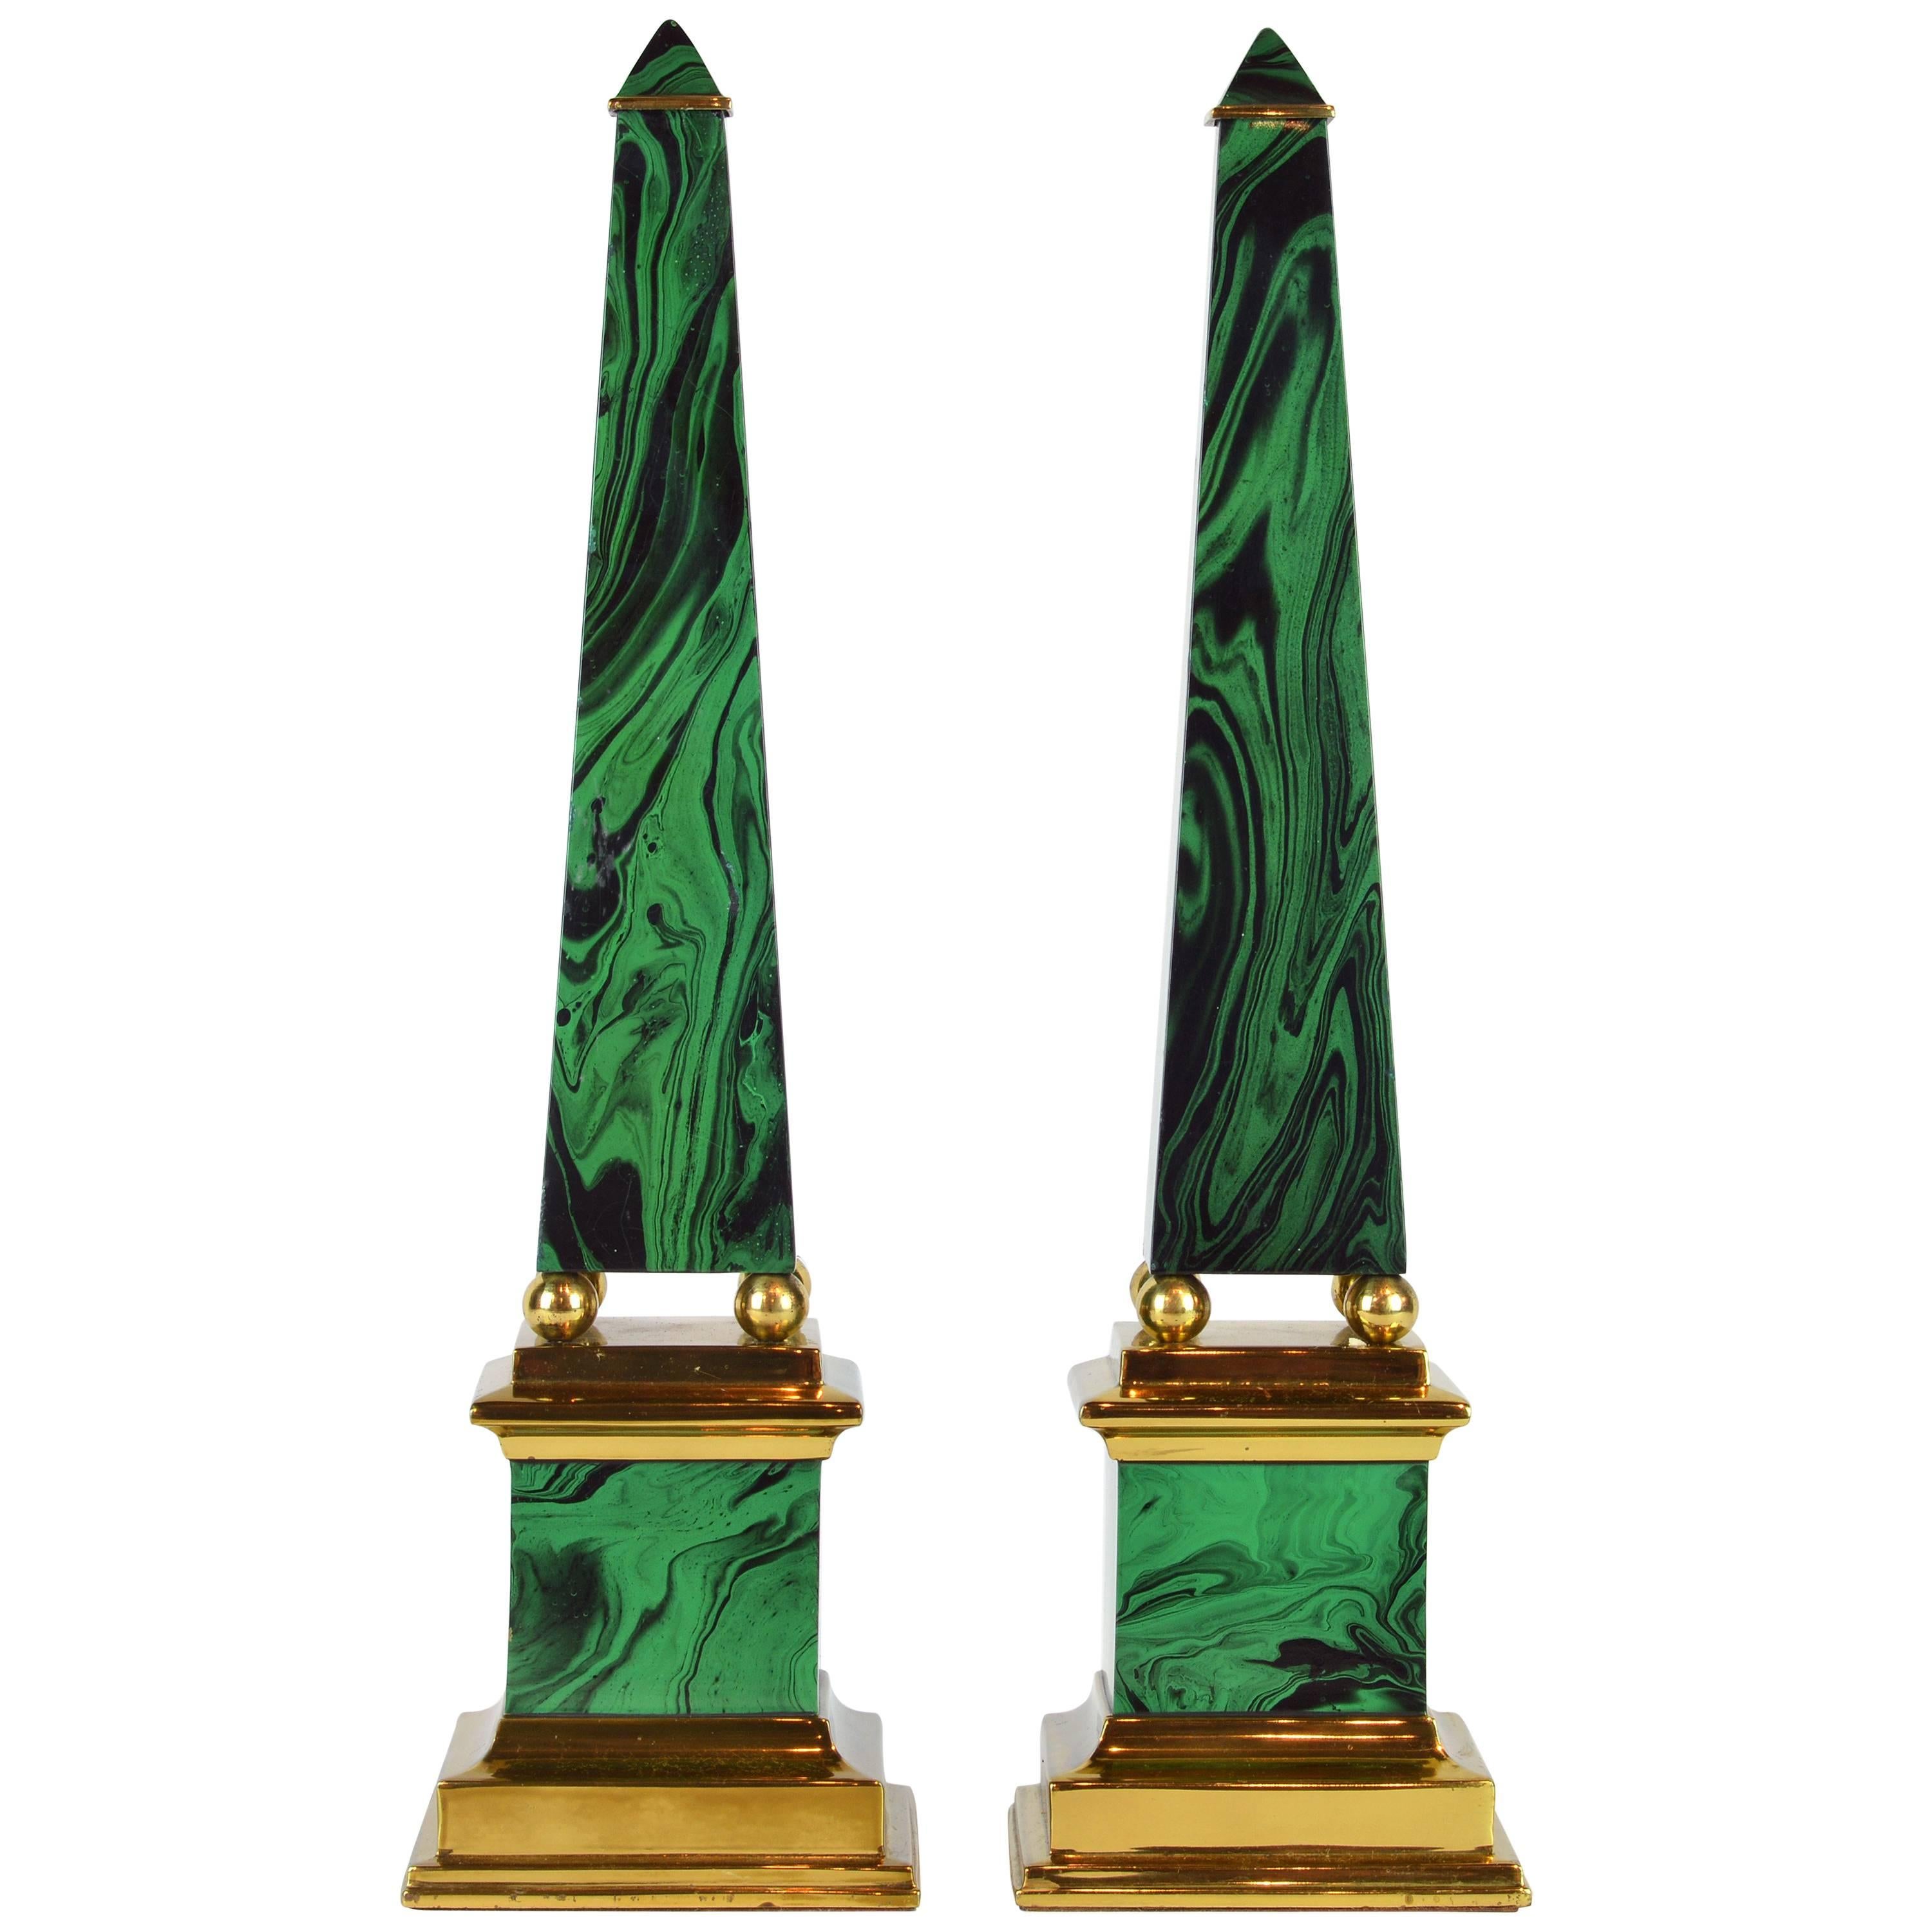 Pair of Tall Paul Hanson Midcentury Faux Malachite and Brass Obelisk Models